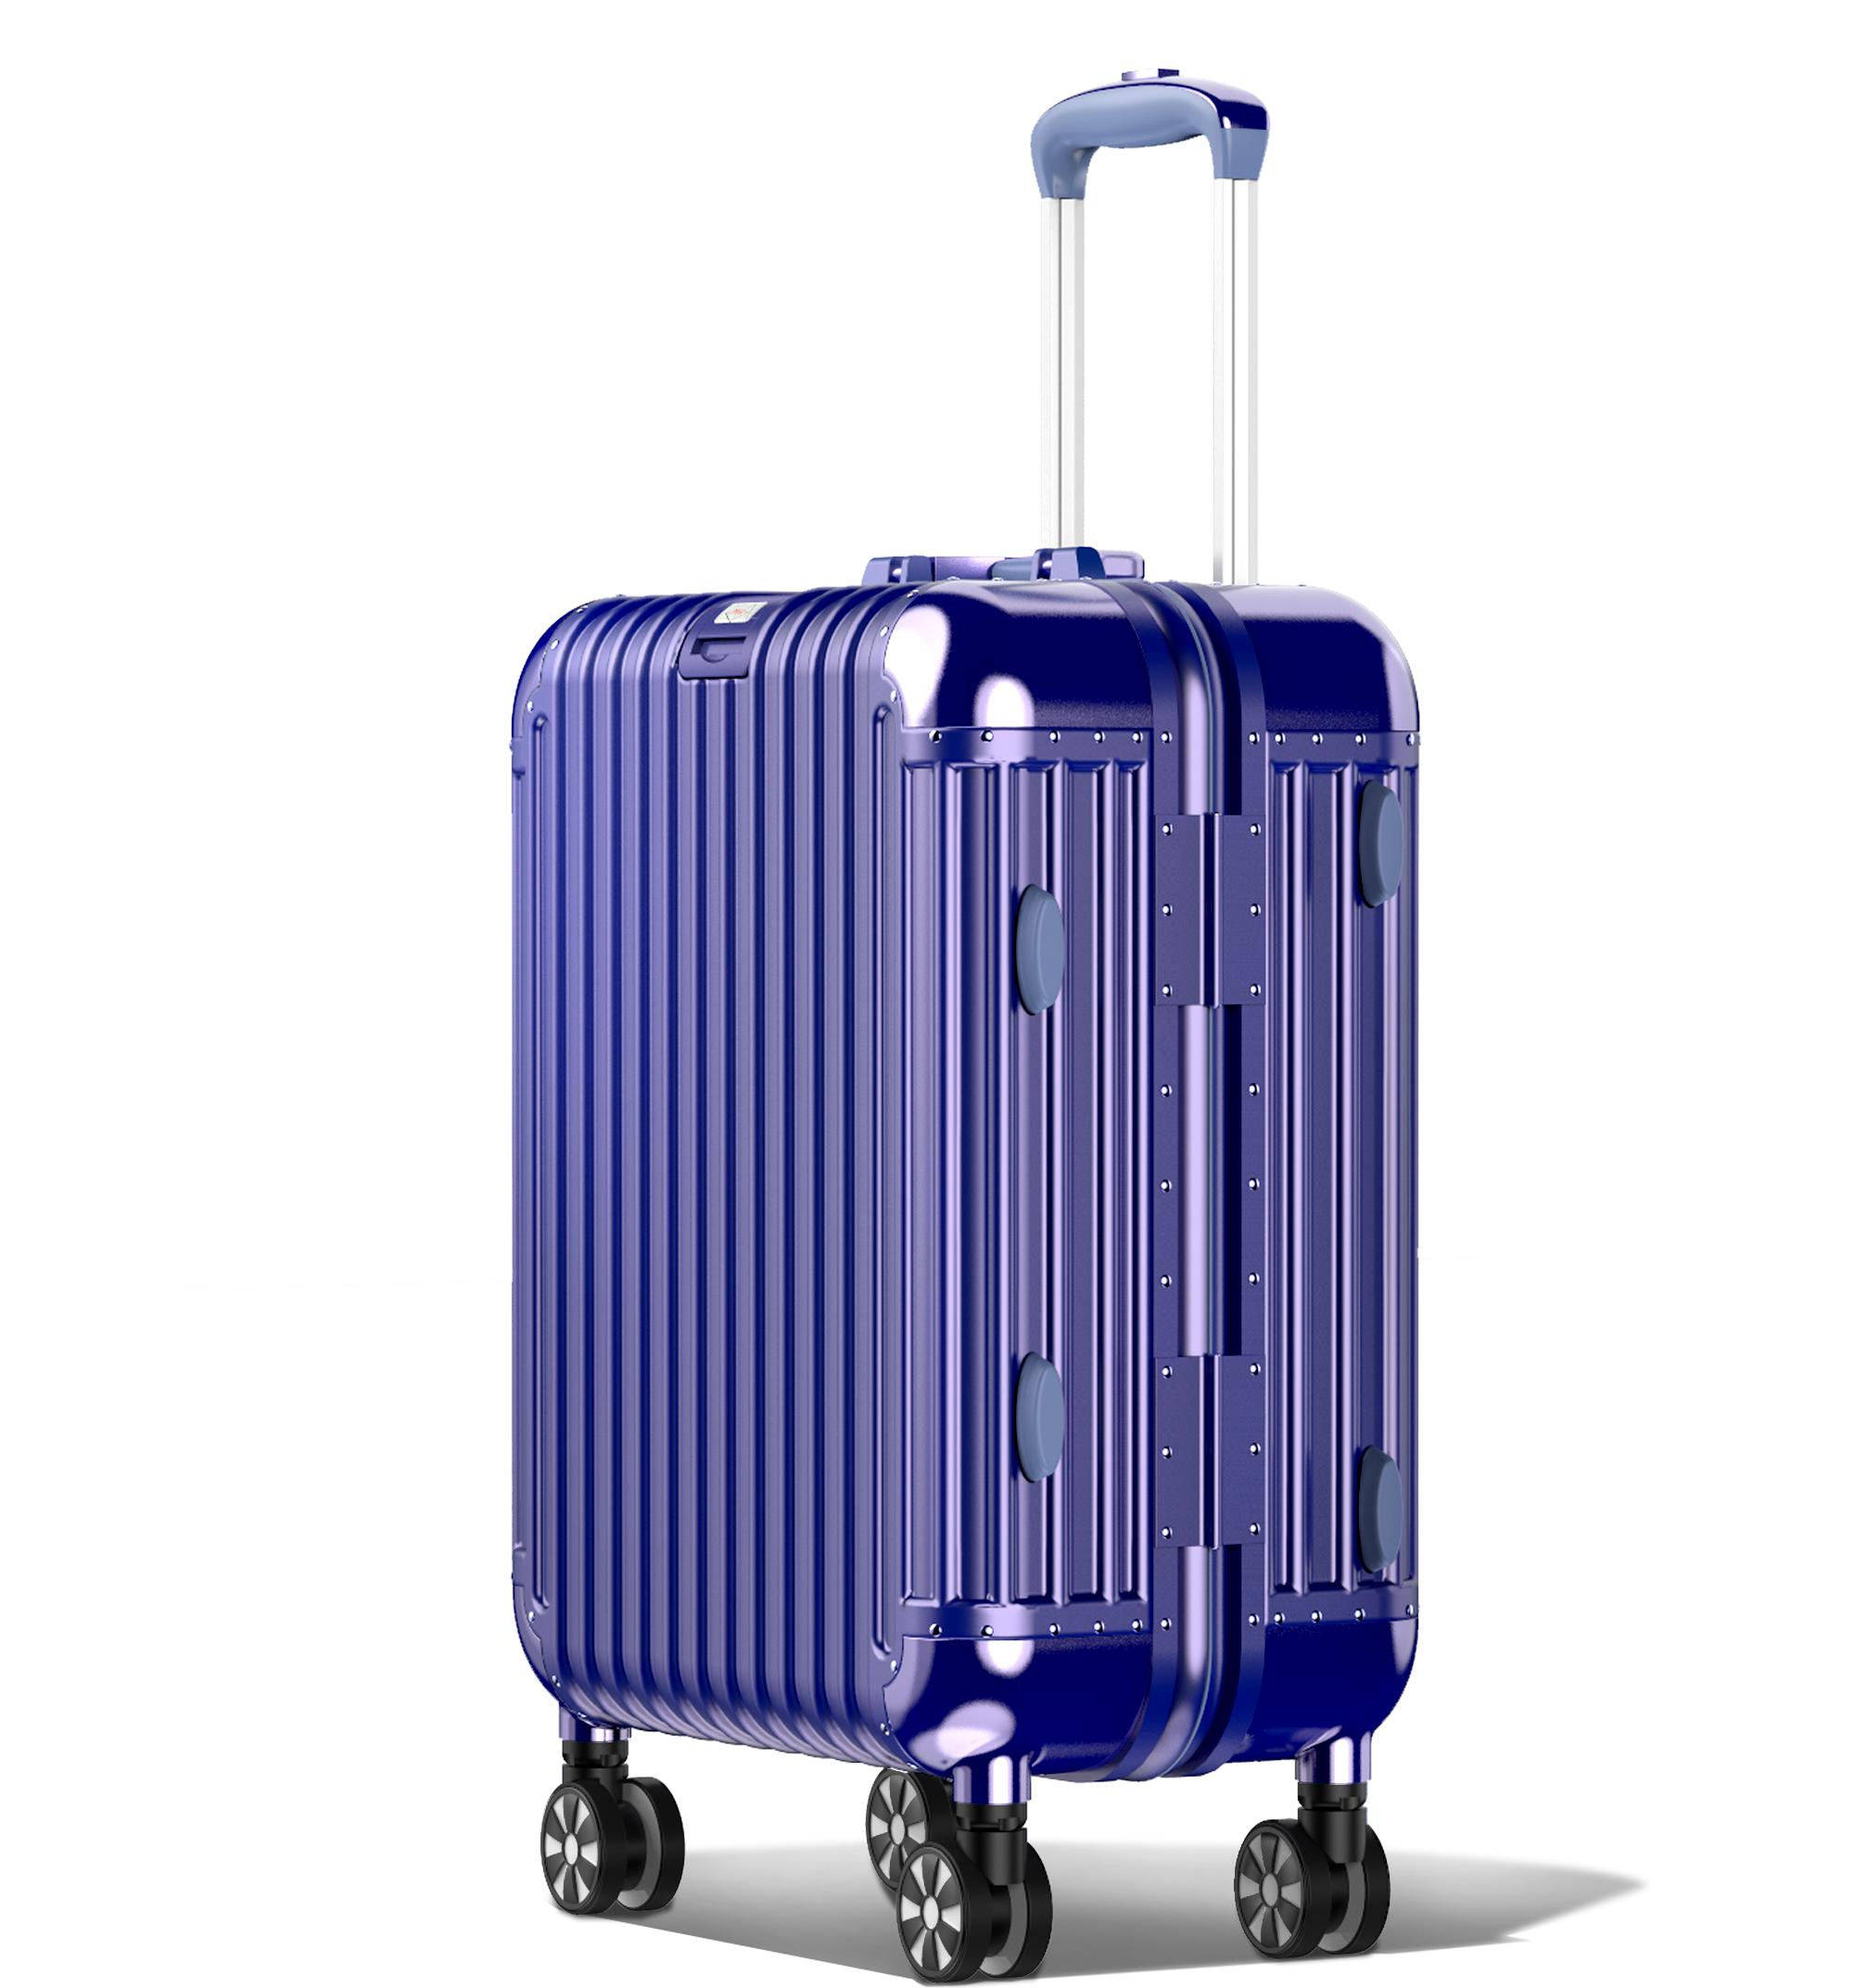 A vertical Blue metallic Check-In 60/25 hard-shell aluminium luggage with an extended telescopic handle, ribbed exterior, and a central latch with side locking mechanisms. It has four double-spinner wheels and is shown against a white background.